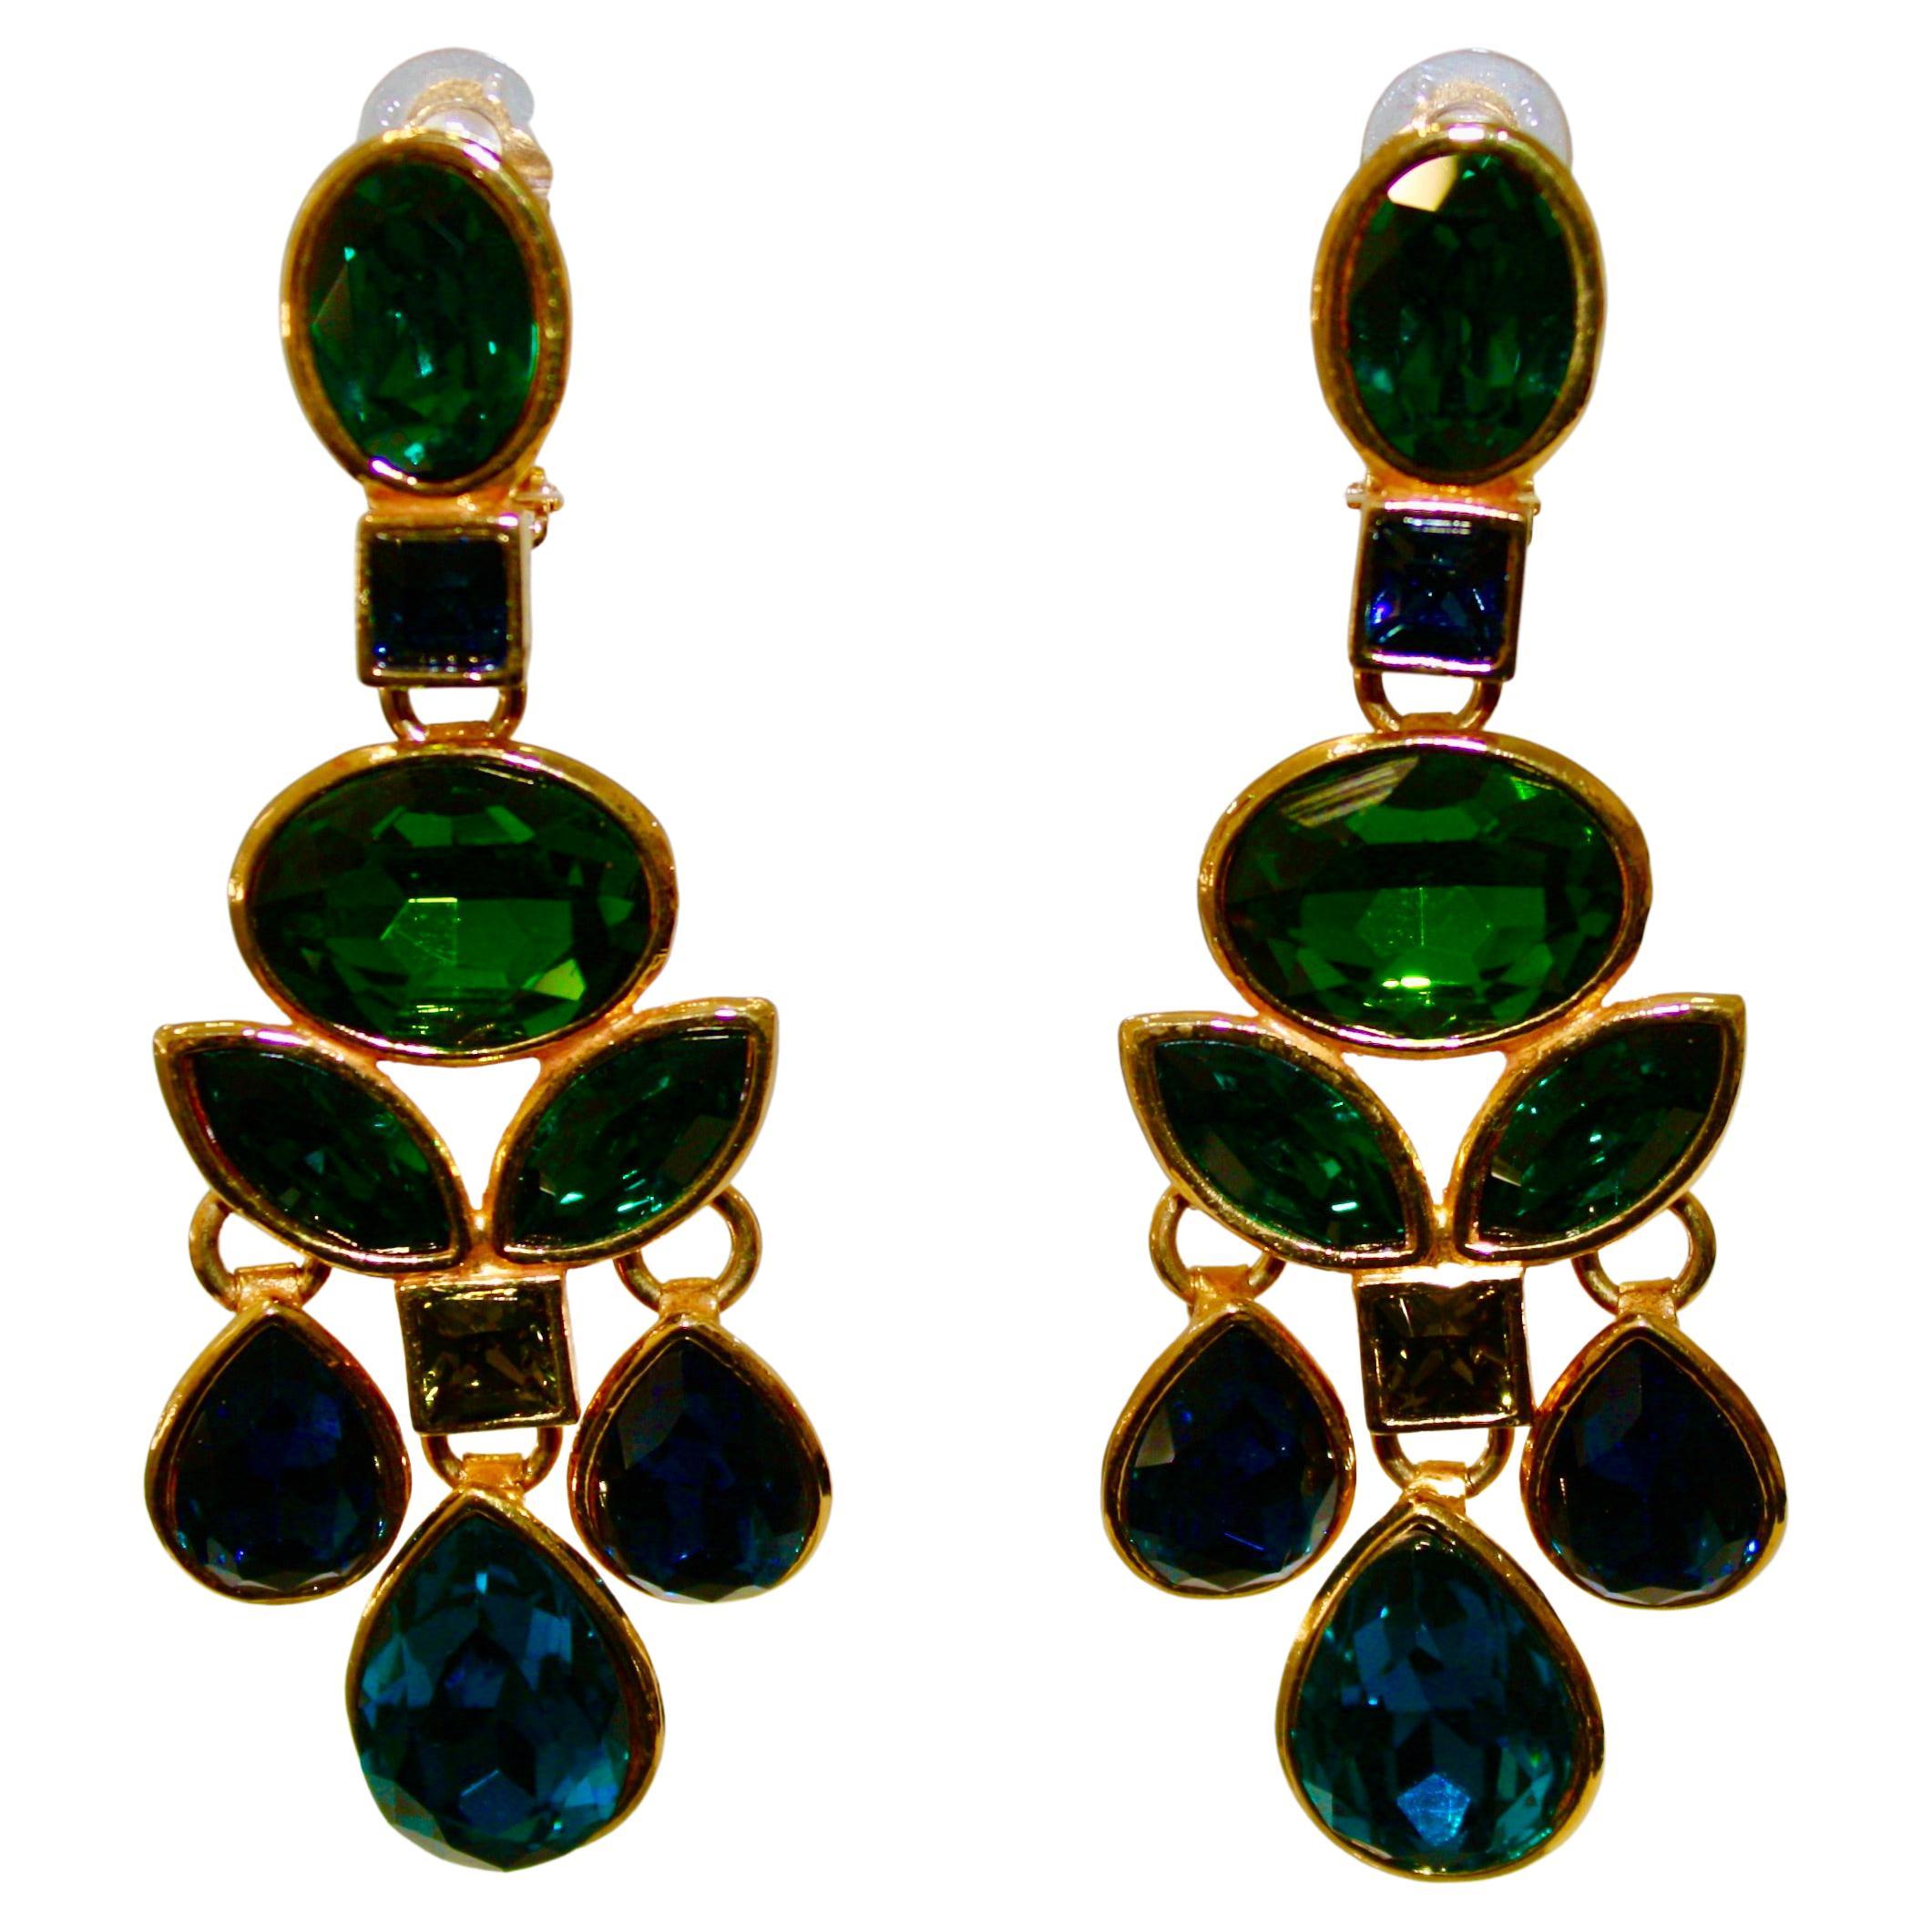 Philippe Ferrandis Blue and Green Statement Clip Earrings